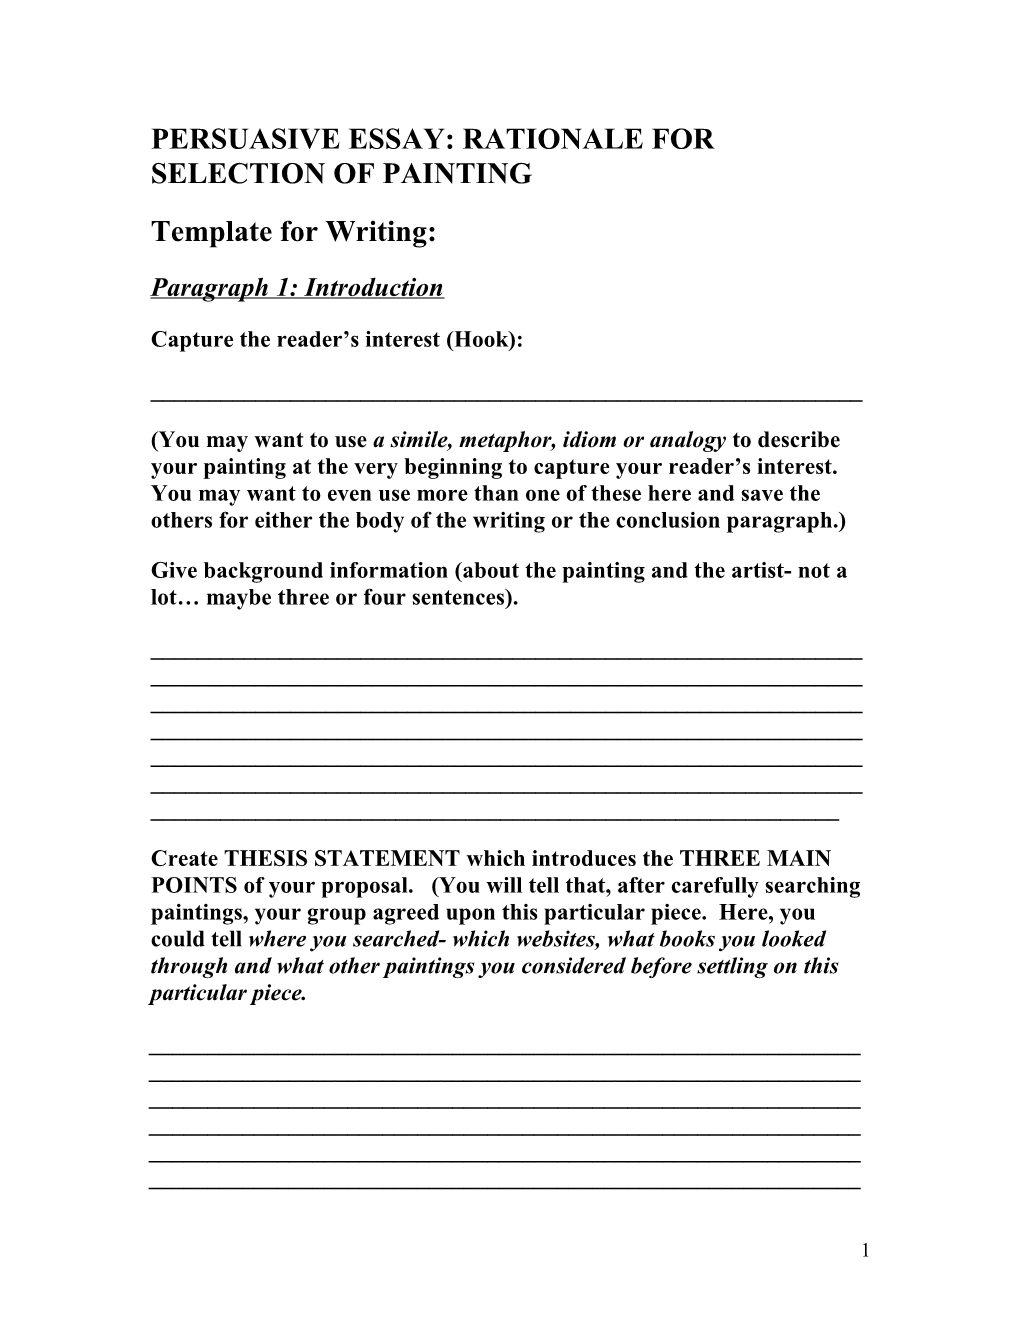 Persuasive Essay: Rationale for Selection of Painting